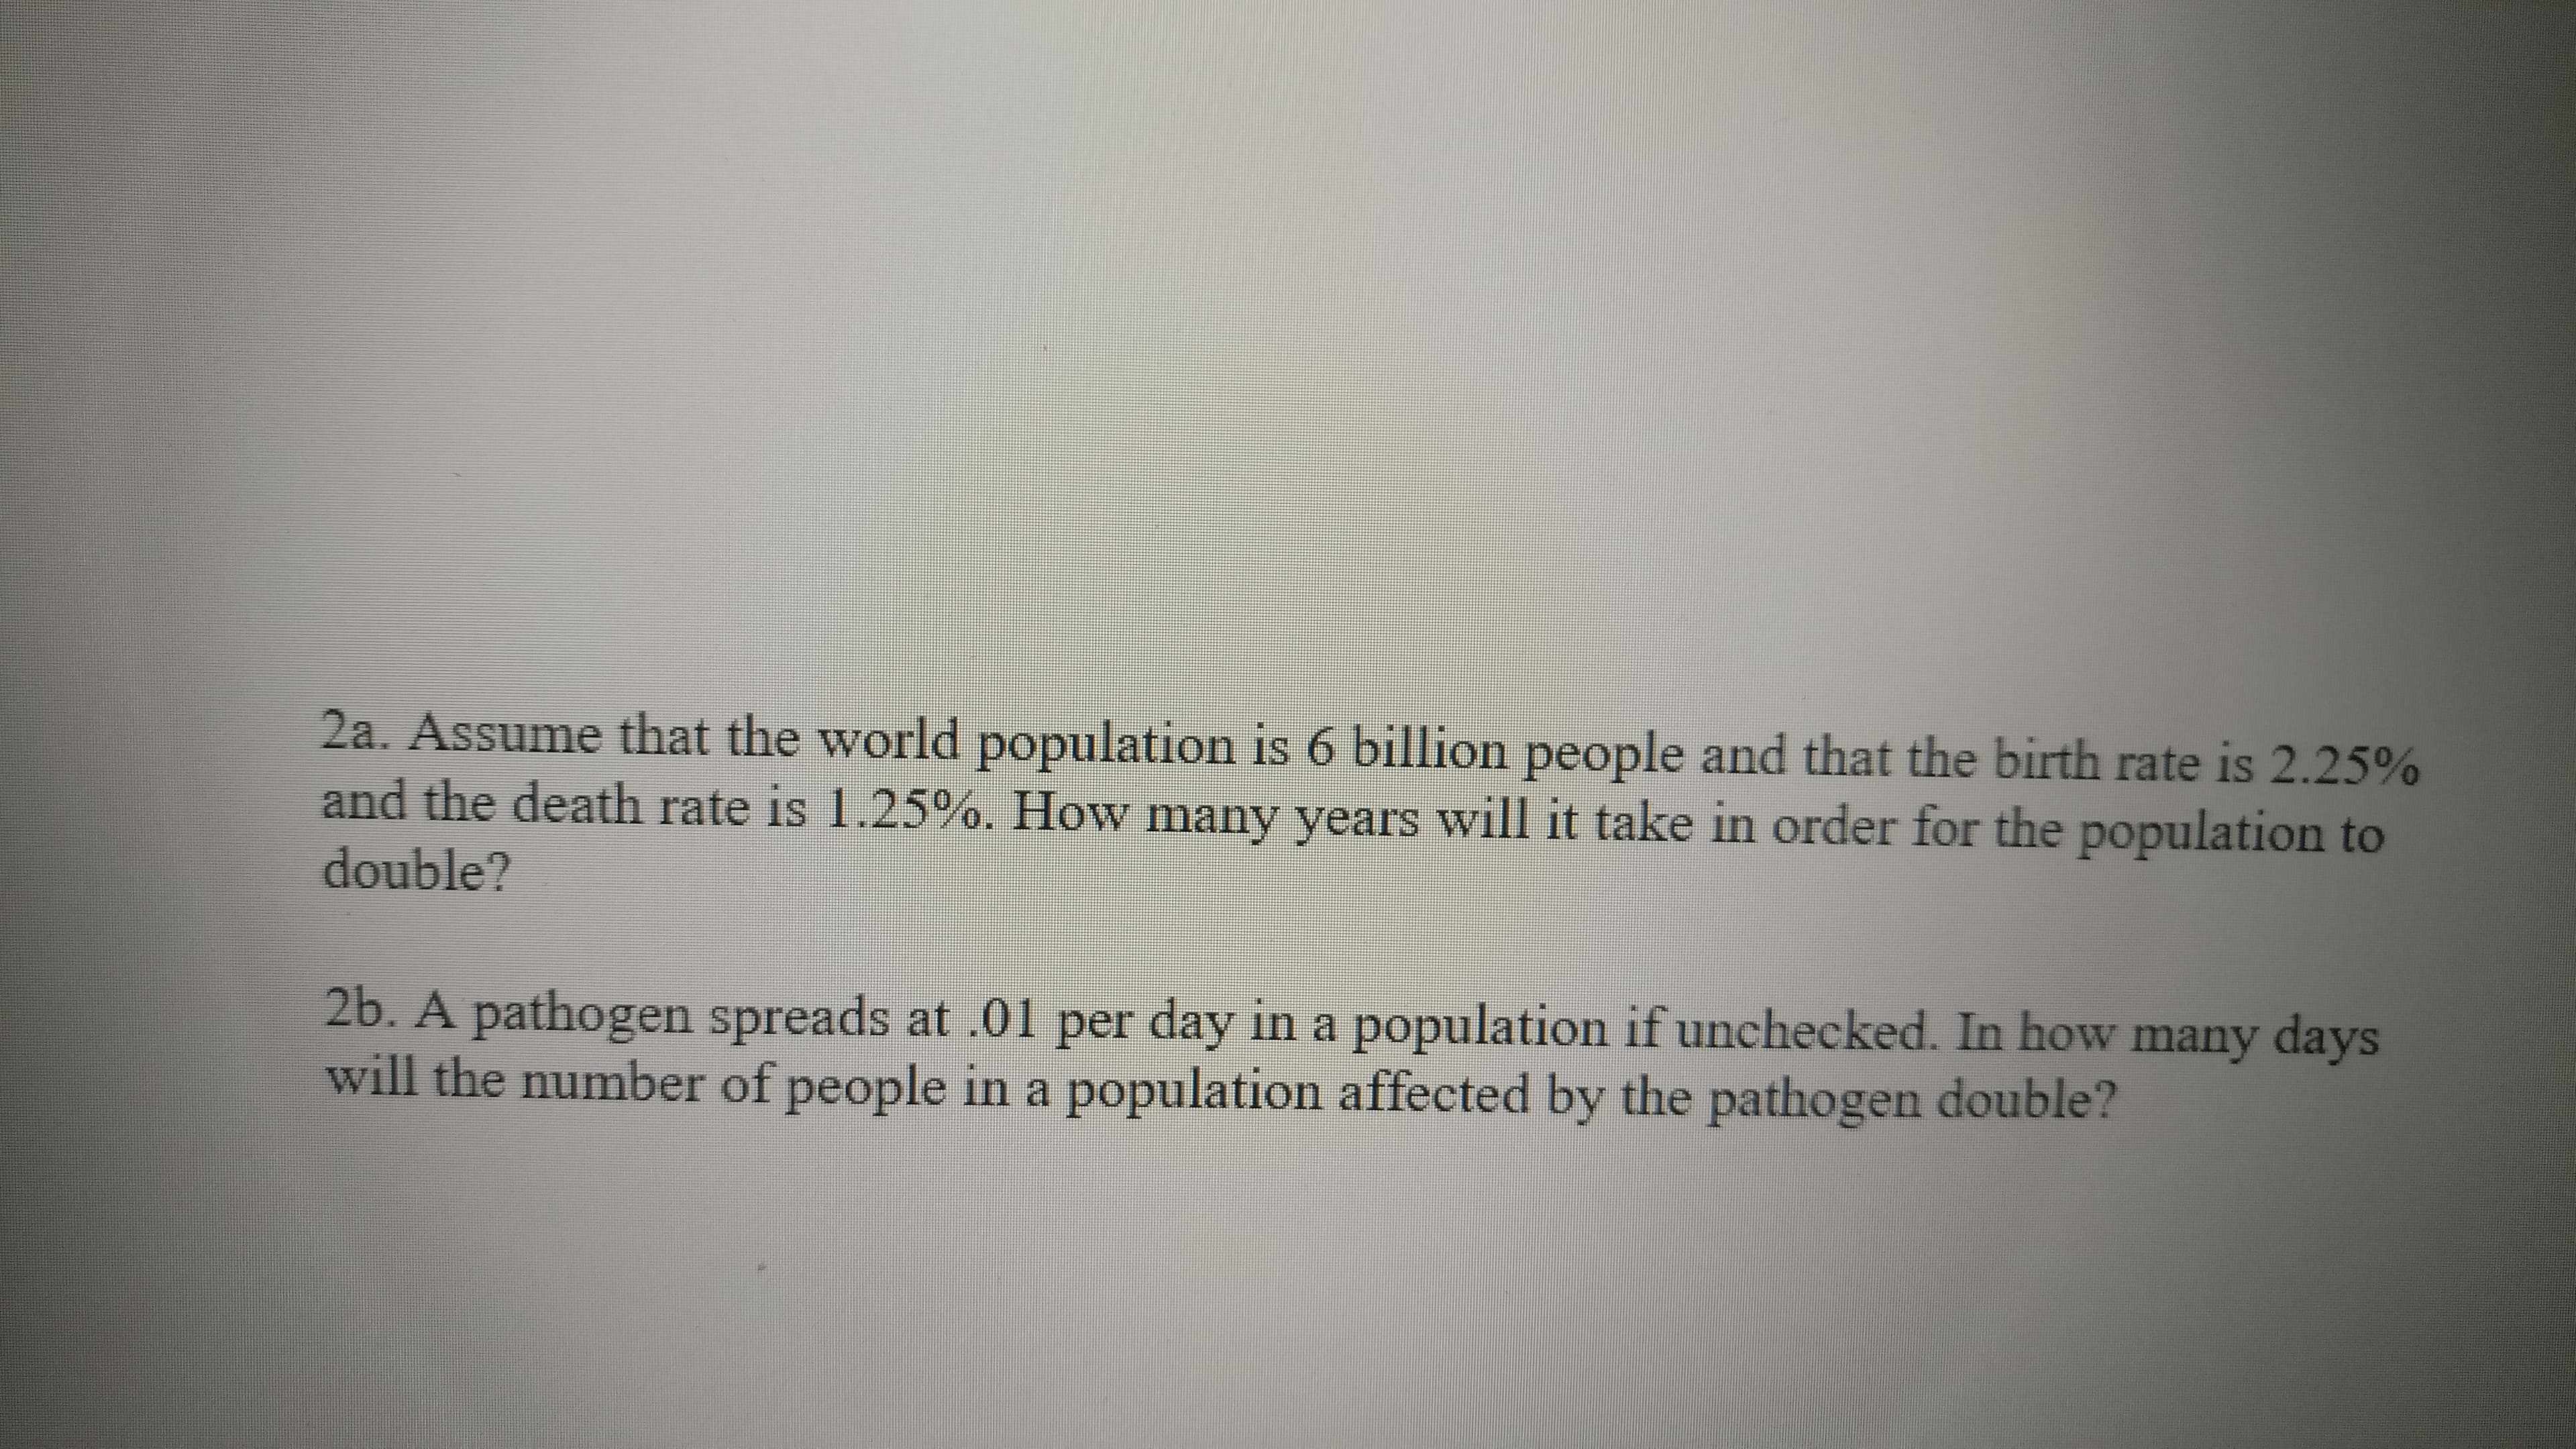 2a. Assume that the world population is 6 billion people and that the birth rate is 2.25%
and the death rate is 1.25%. How many years will it take in order for the population to
double?
